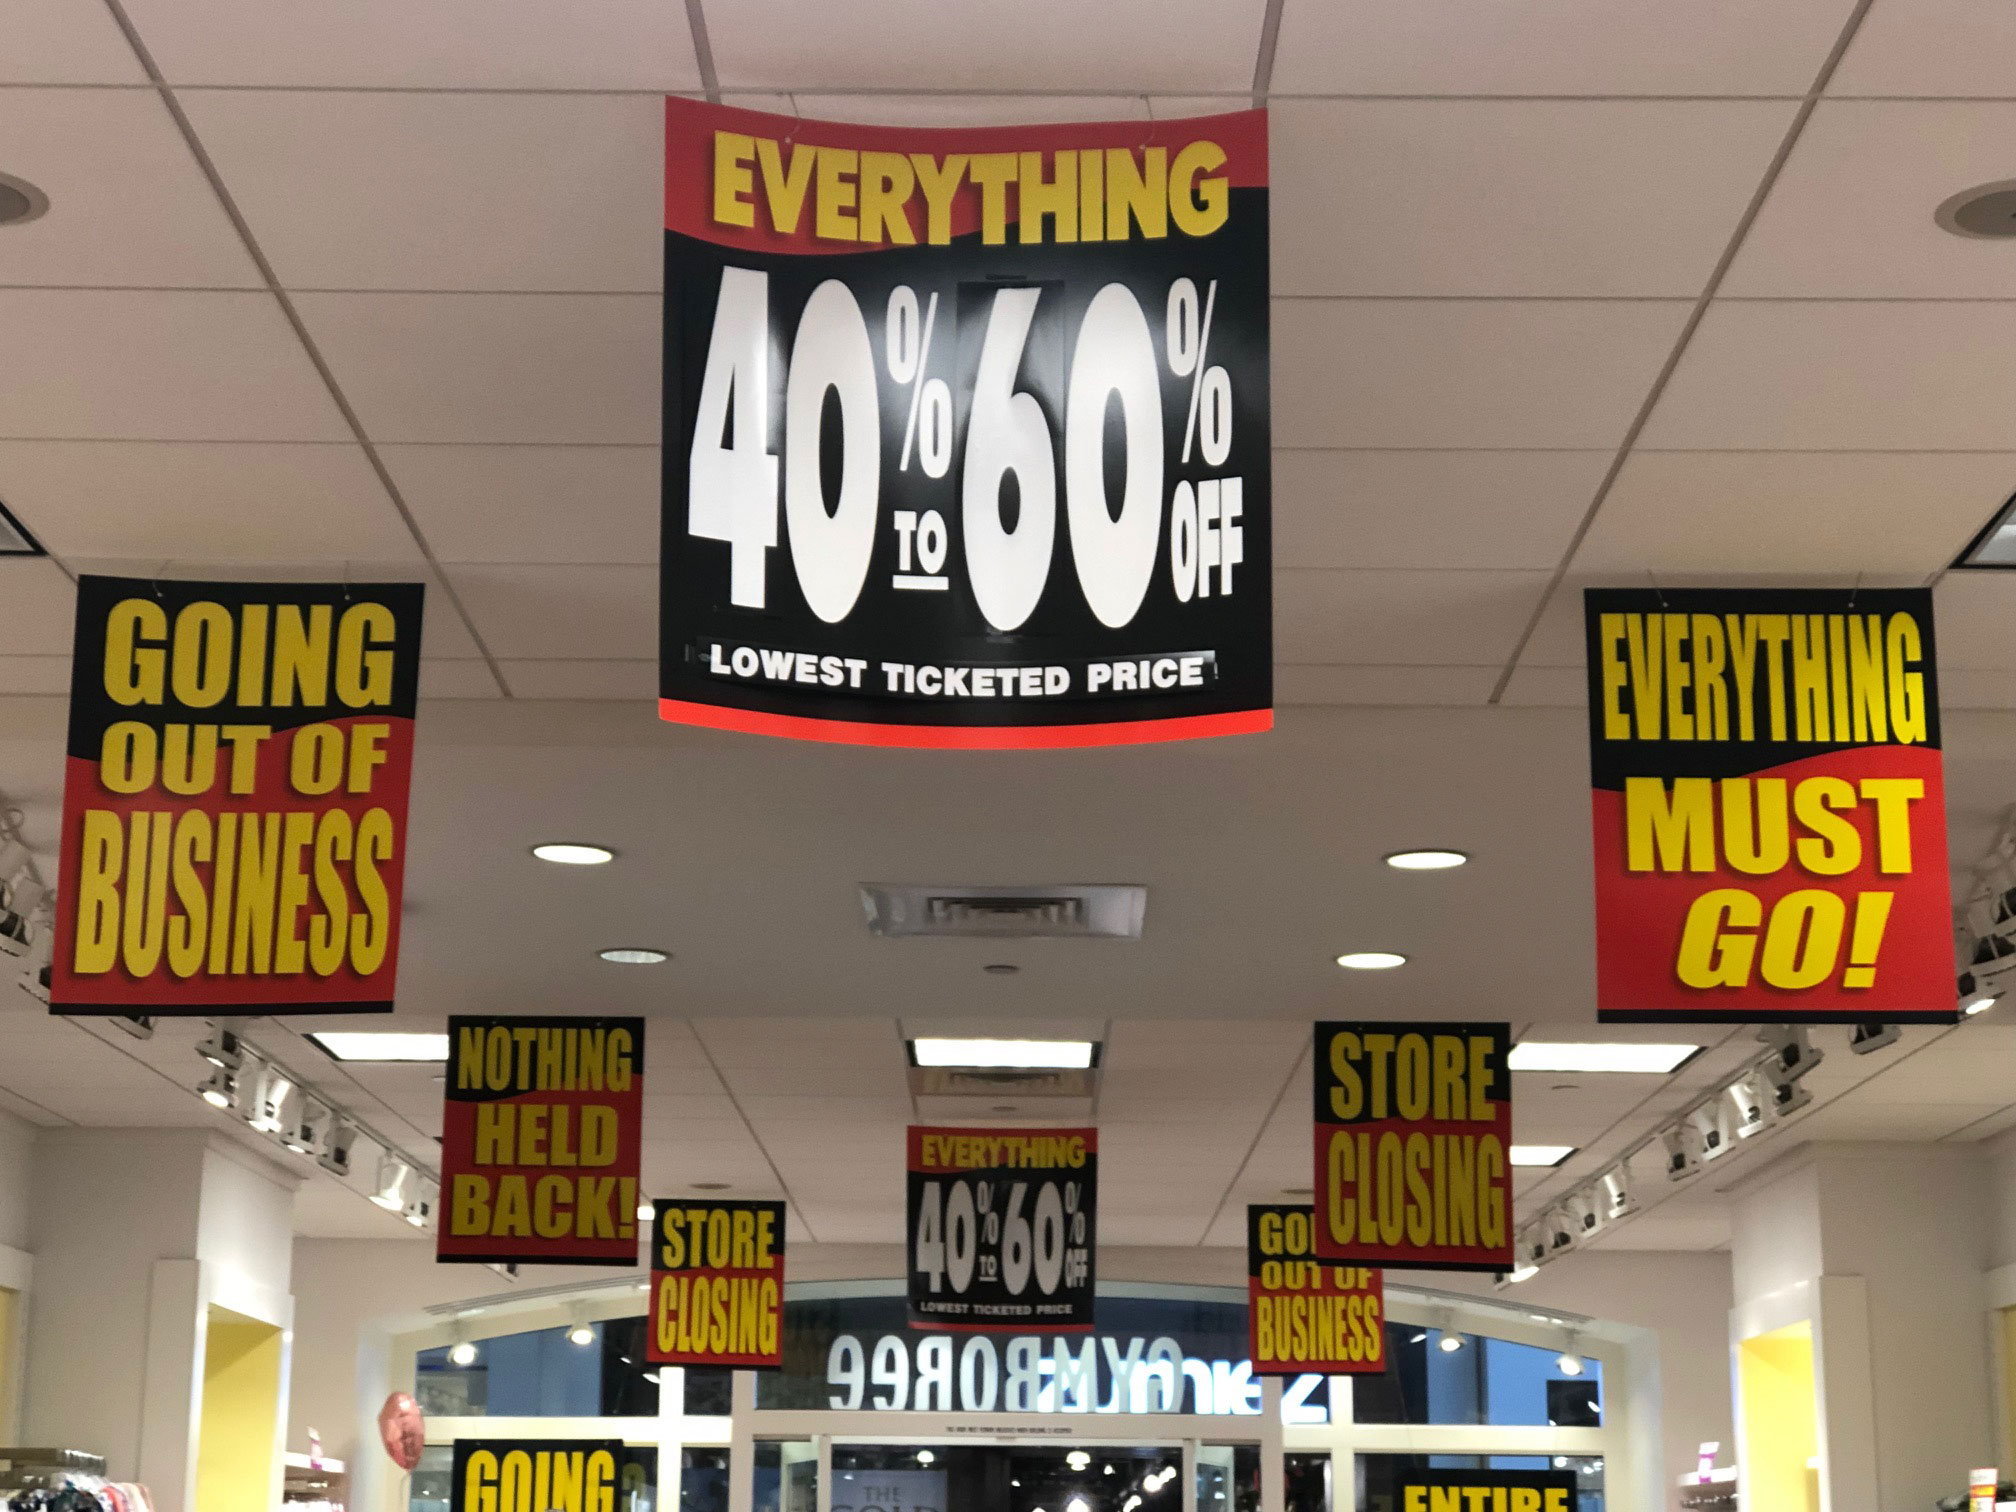 When they say "Everything must go" they mean it. Jobs, stores, sometimes entire neighborhoods are all at stake.  Photo: Morf Morford